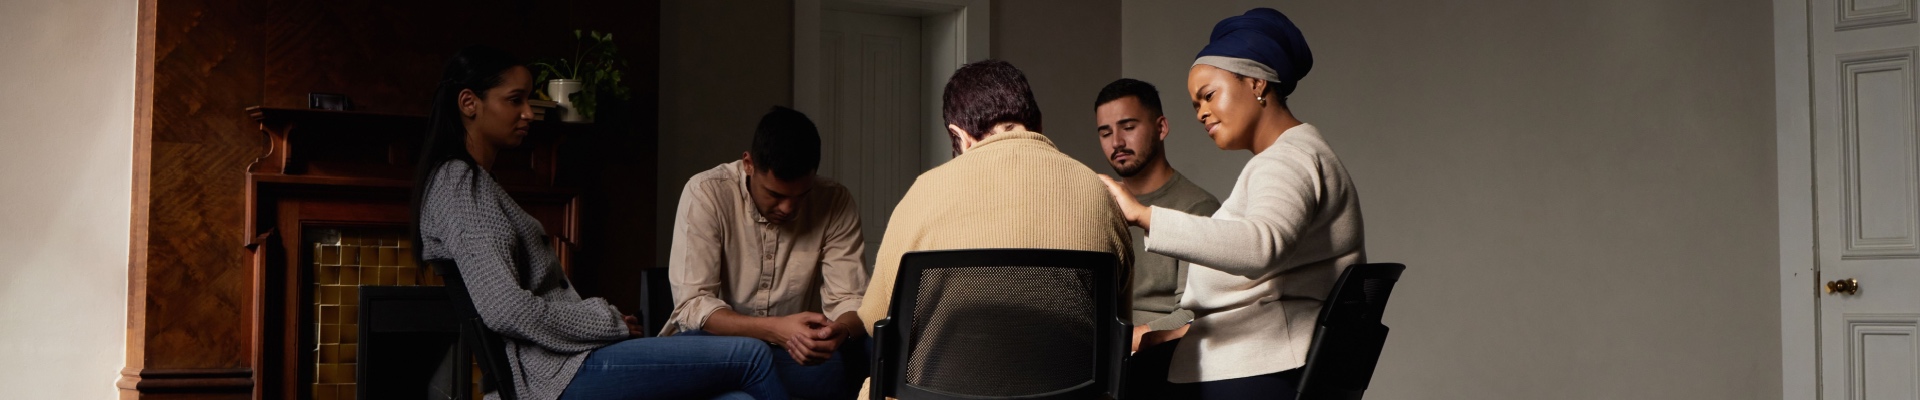 Support, group of people in therapy a community center and understanding, sharing feeling and talking in session. Mental health, addiction or depression, men and women with therapist sitting together